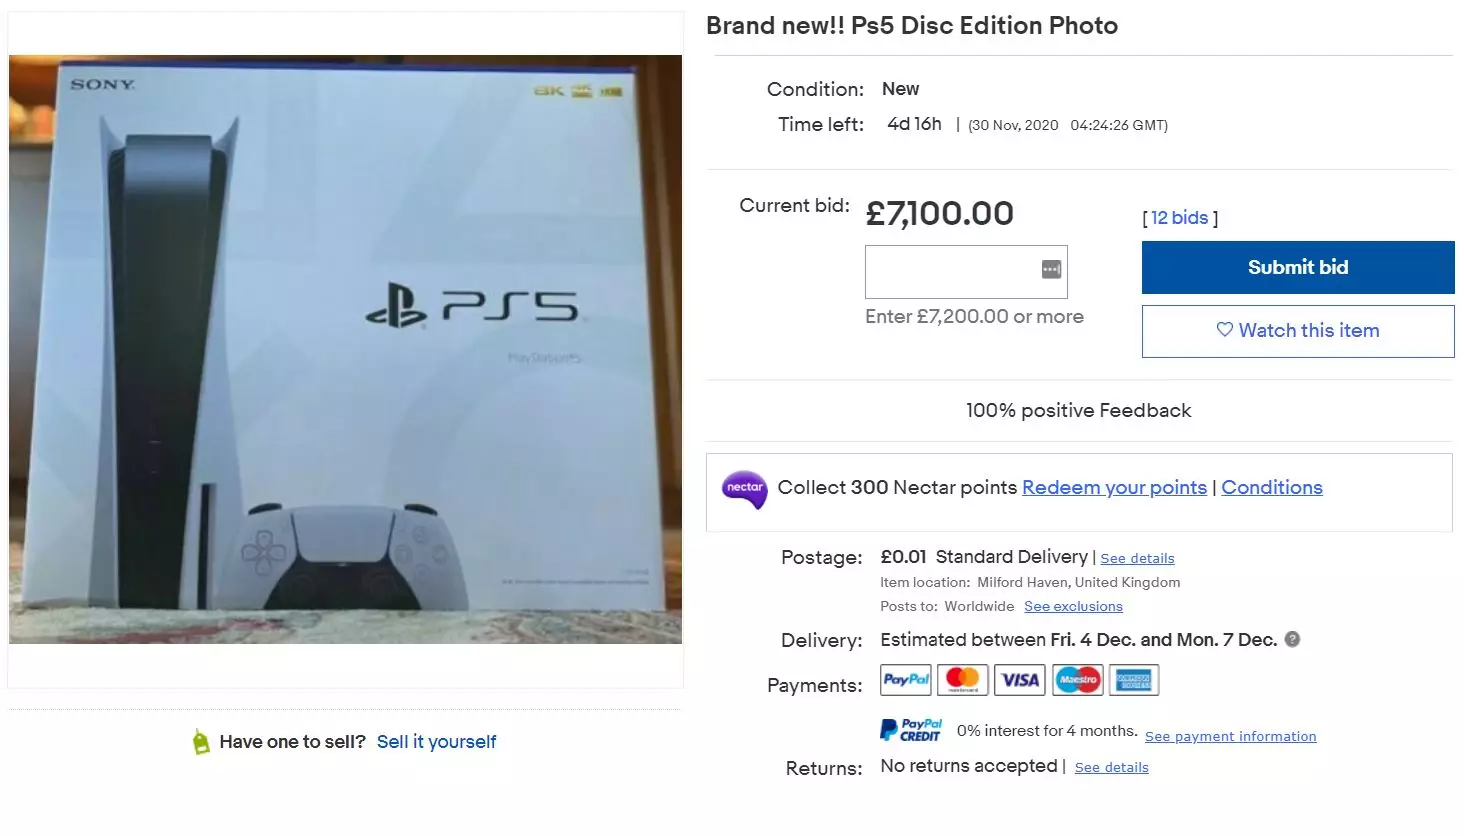 It's a nice photo but not £7,000 nice.